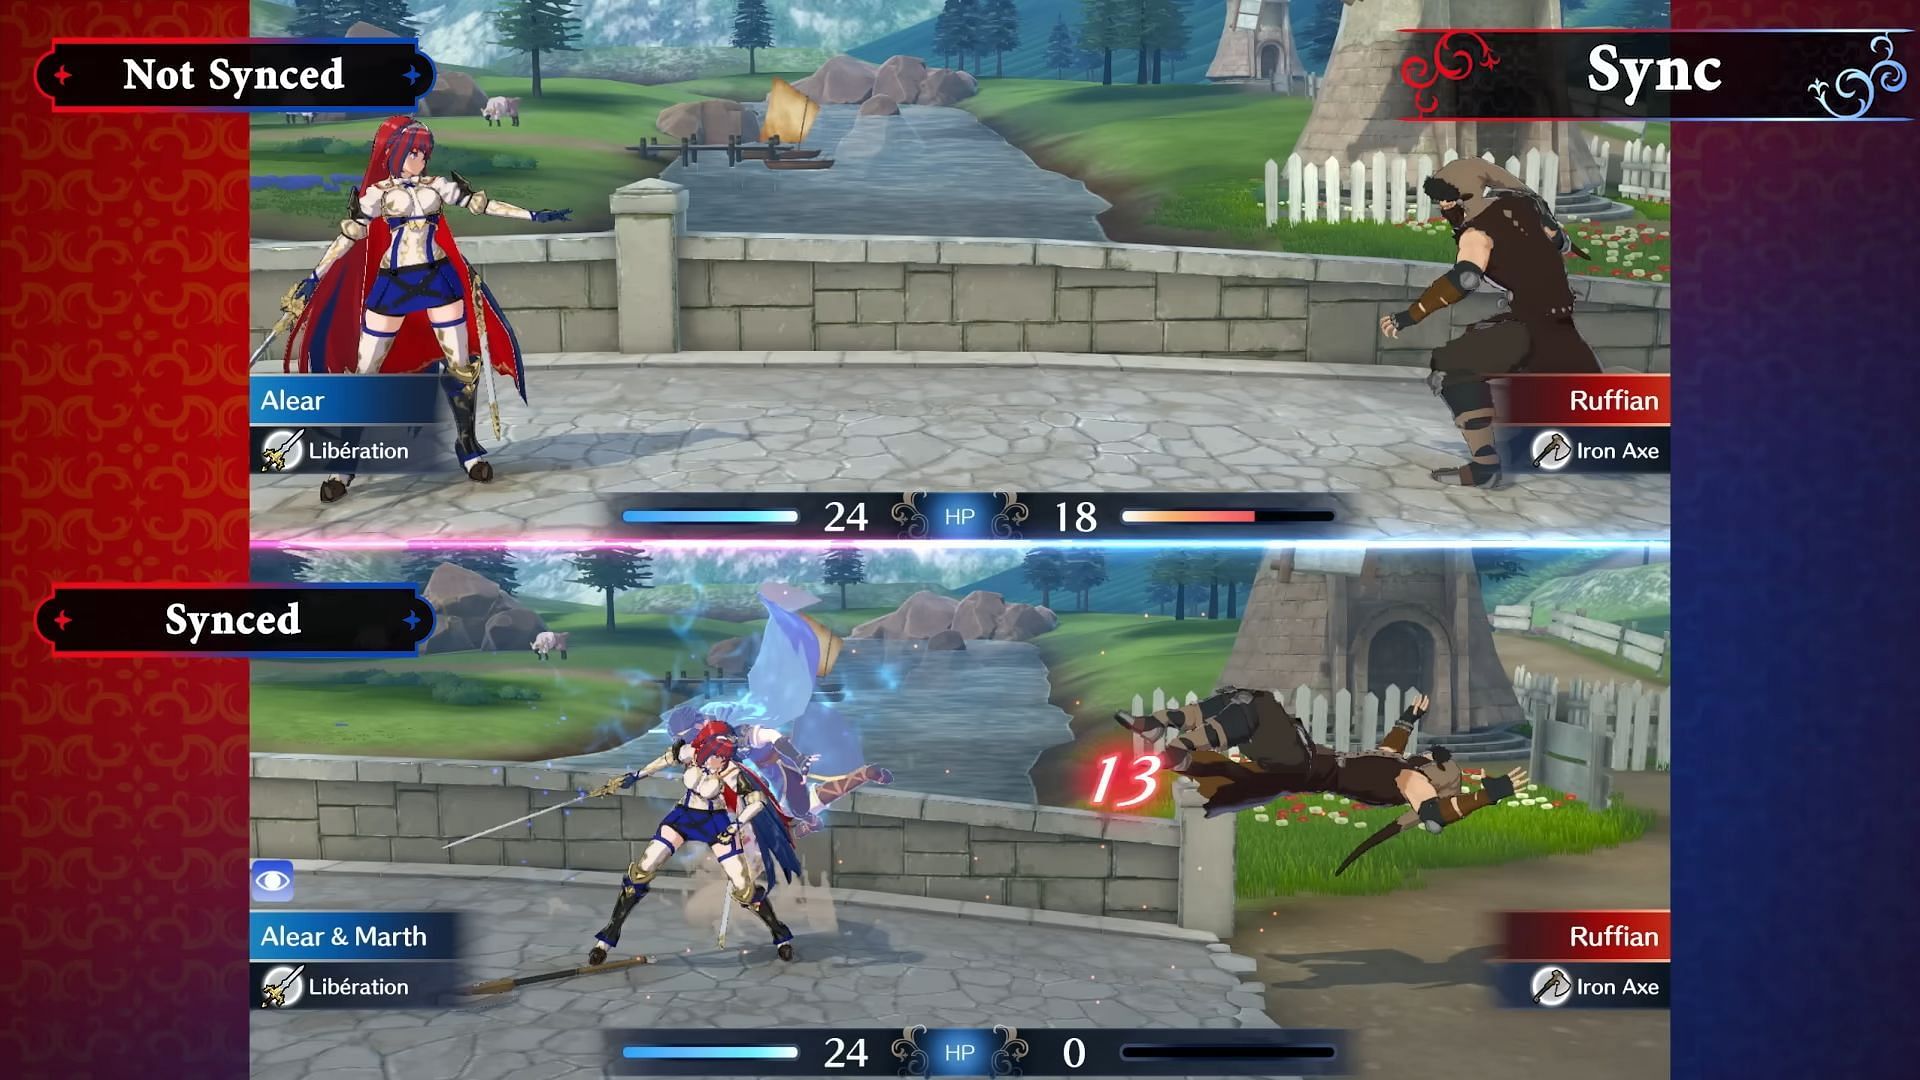 Syncing with heroes increases your damage output (Image via Nintendo)